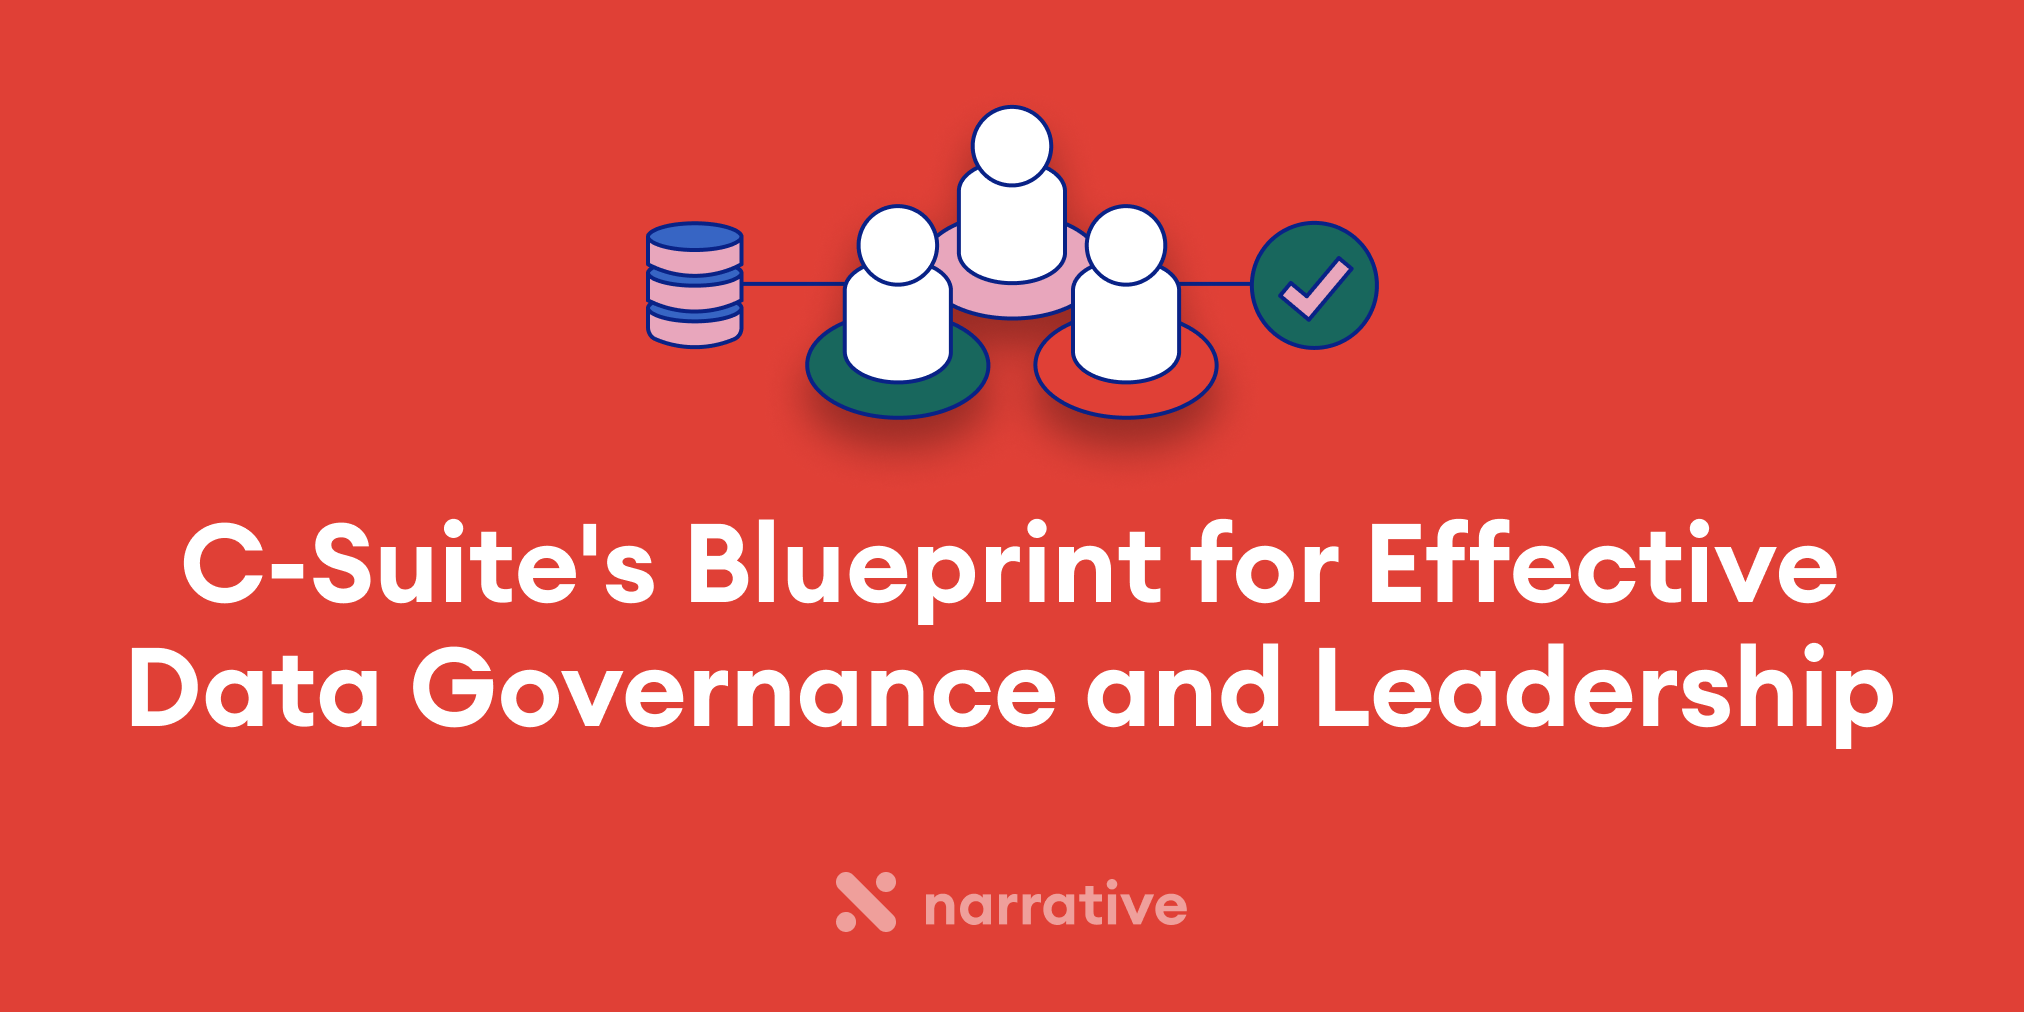 C-Suite's Blueprint for Effective Data Governance and Leadership